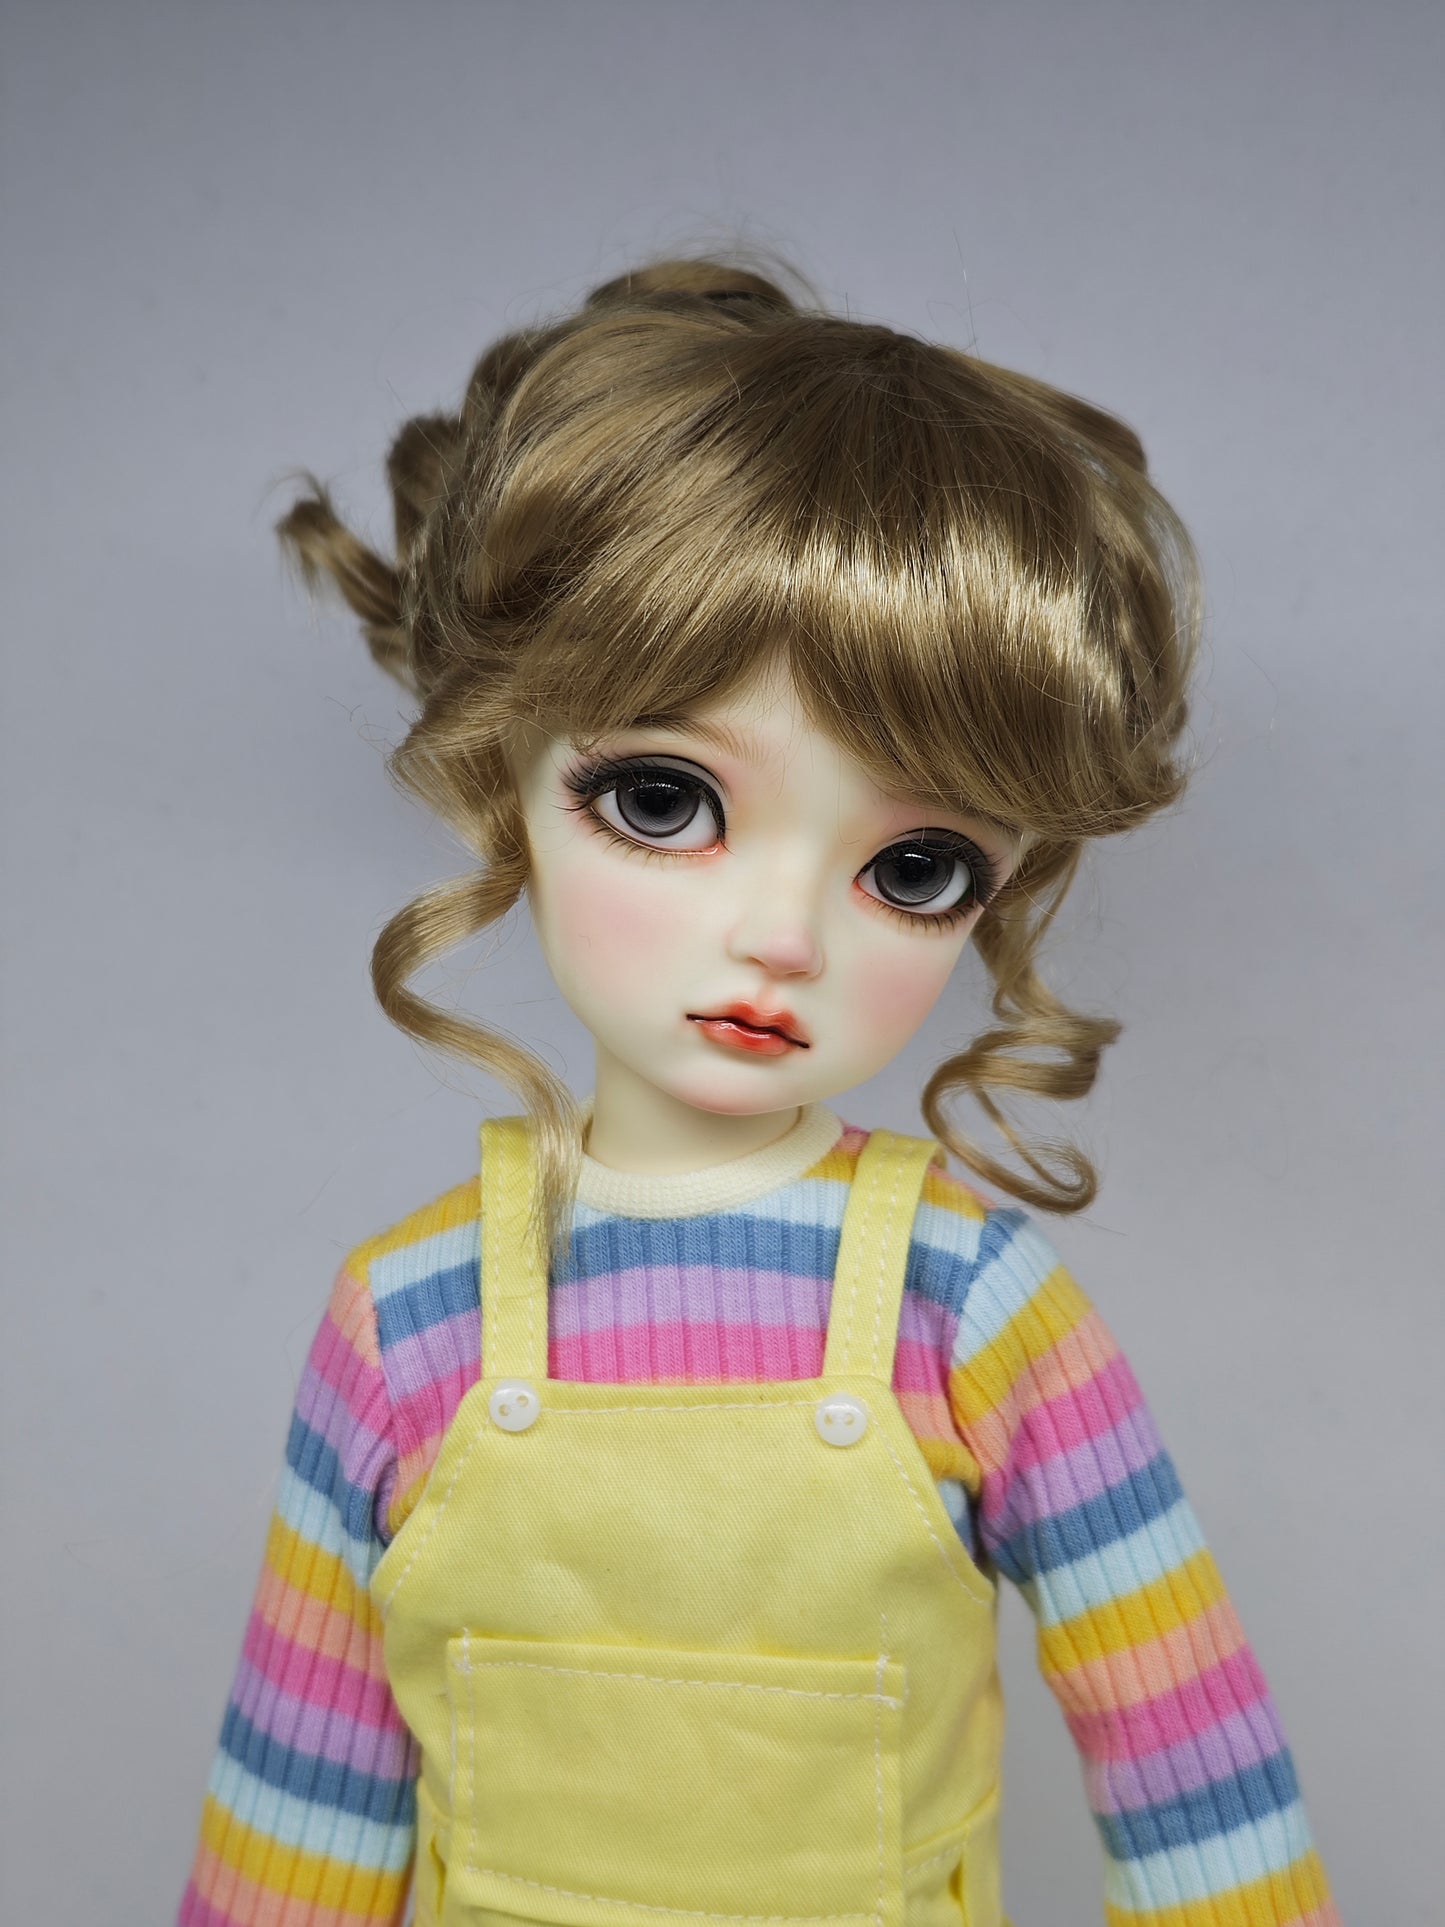 1/4 girl doll Alice super kid version with makeup, wig and dress